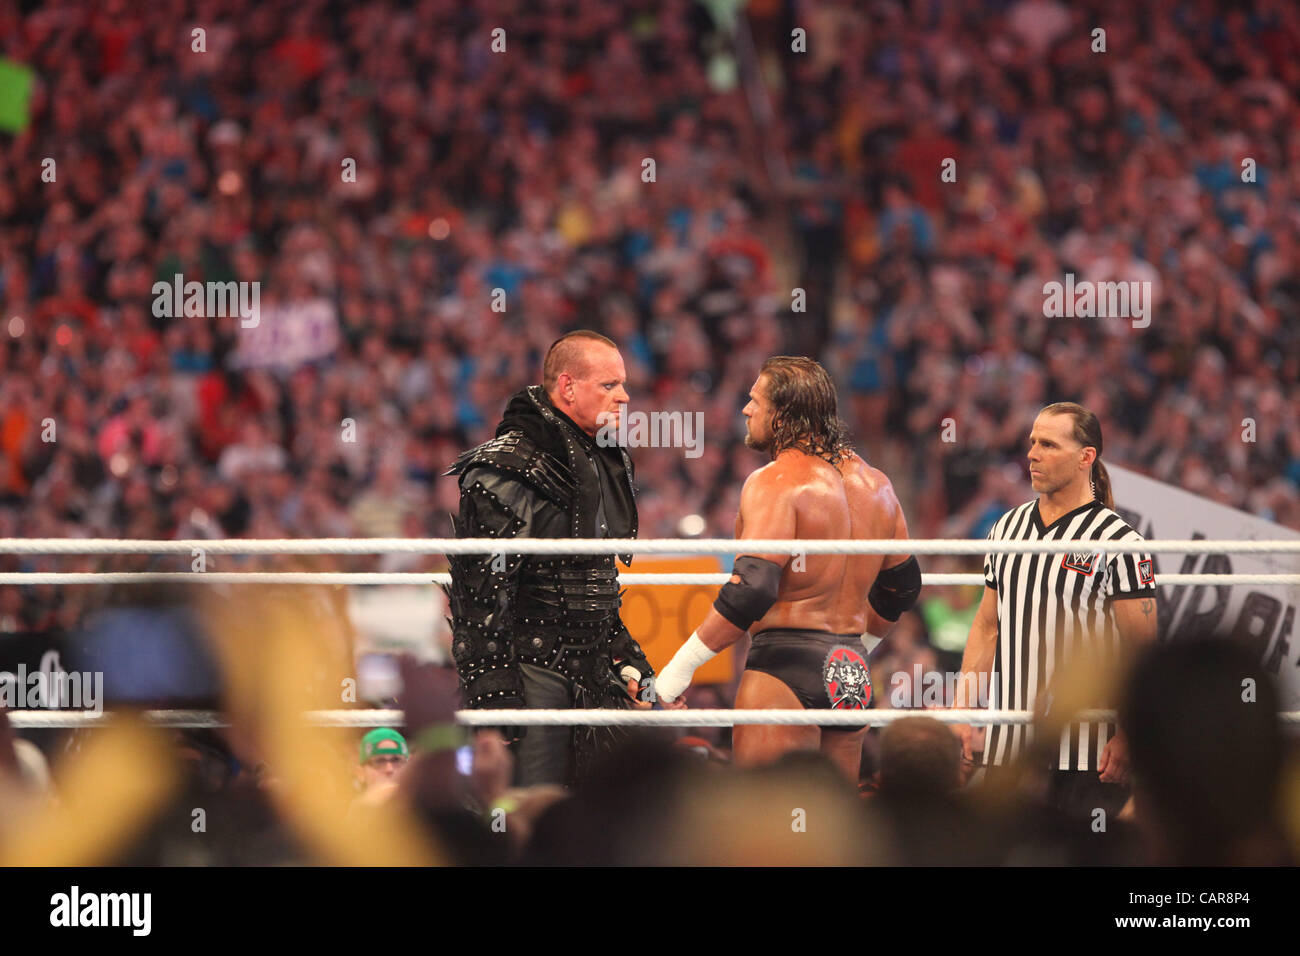 WWE legends The Undertaker wrestled Triple H at Wrestlemania 28 in Miami, FL at Sun Life Stadium. WWE Hall of Famer Shawn Michaels served as the special referee. The Undertaker won, advancing his streak to 20-0 at Wrestlemania events. Stock Photo